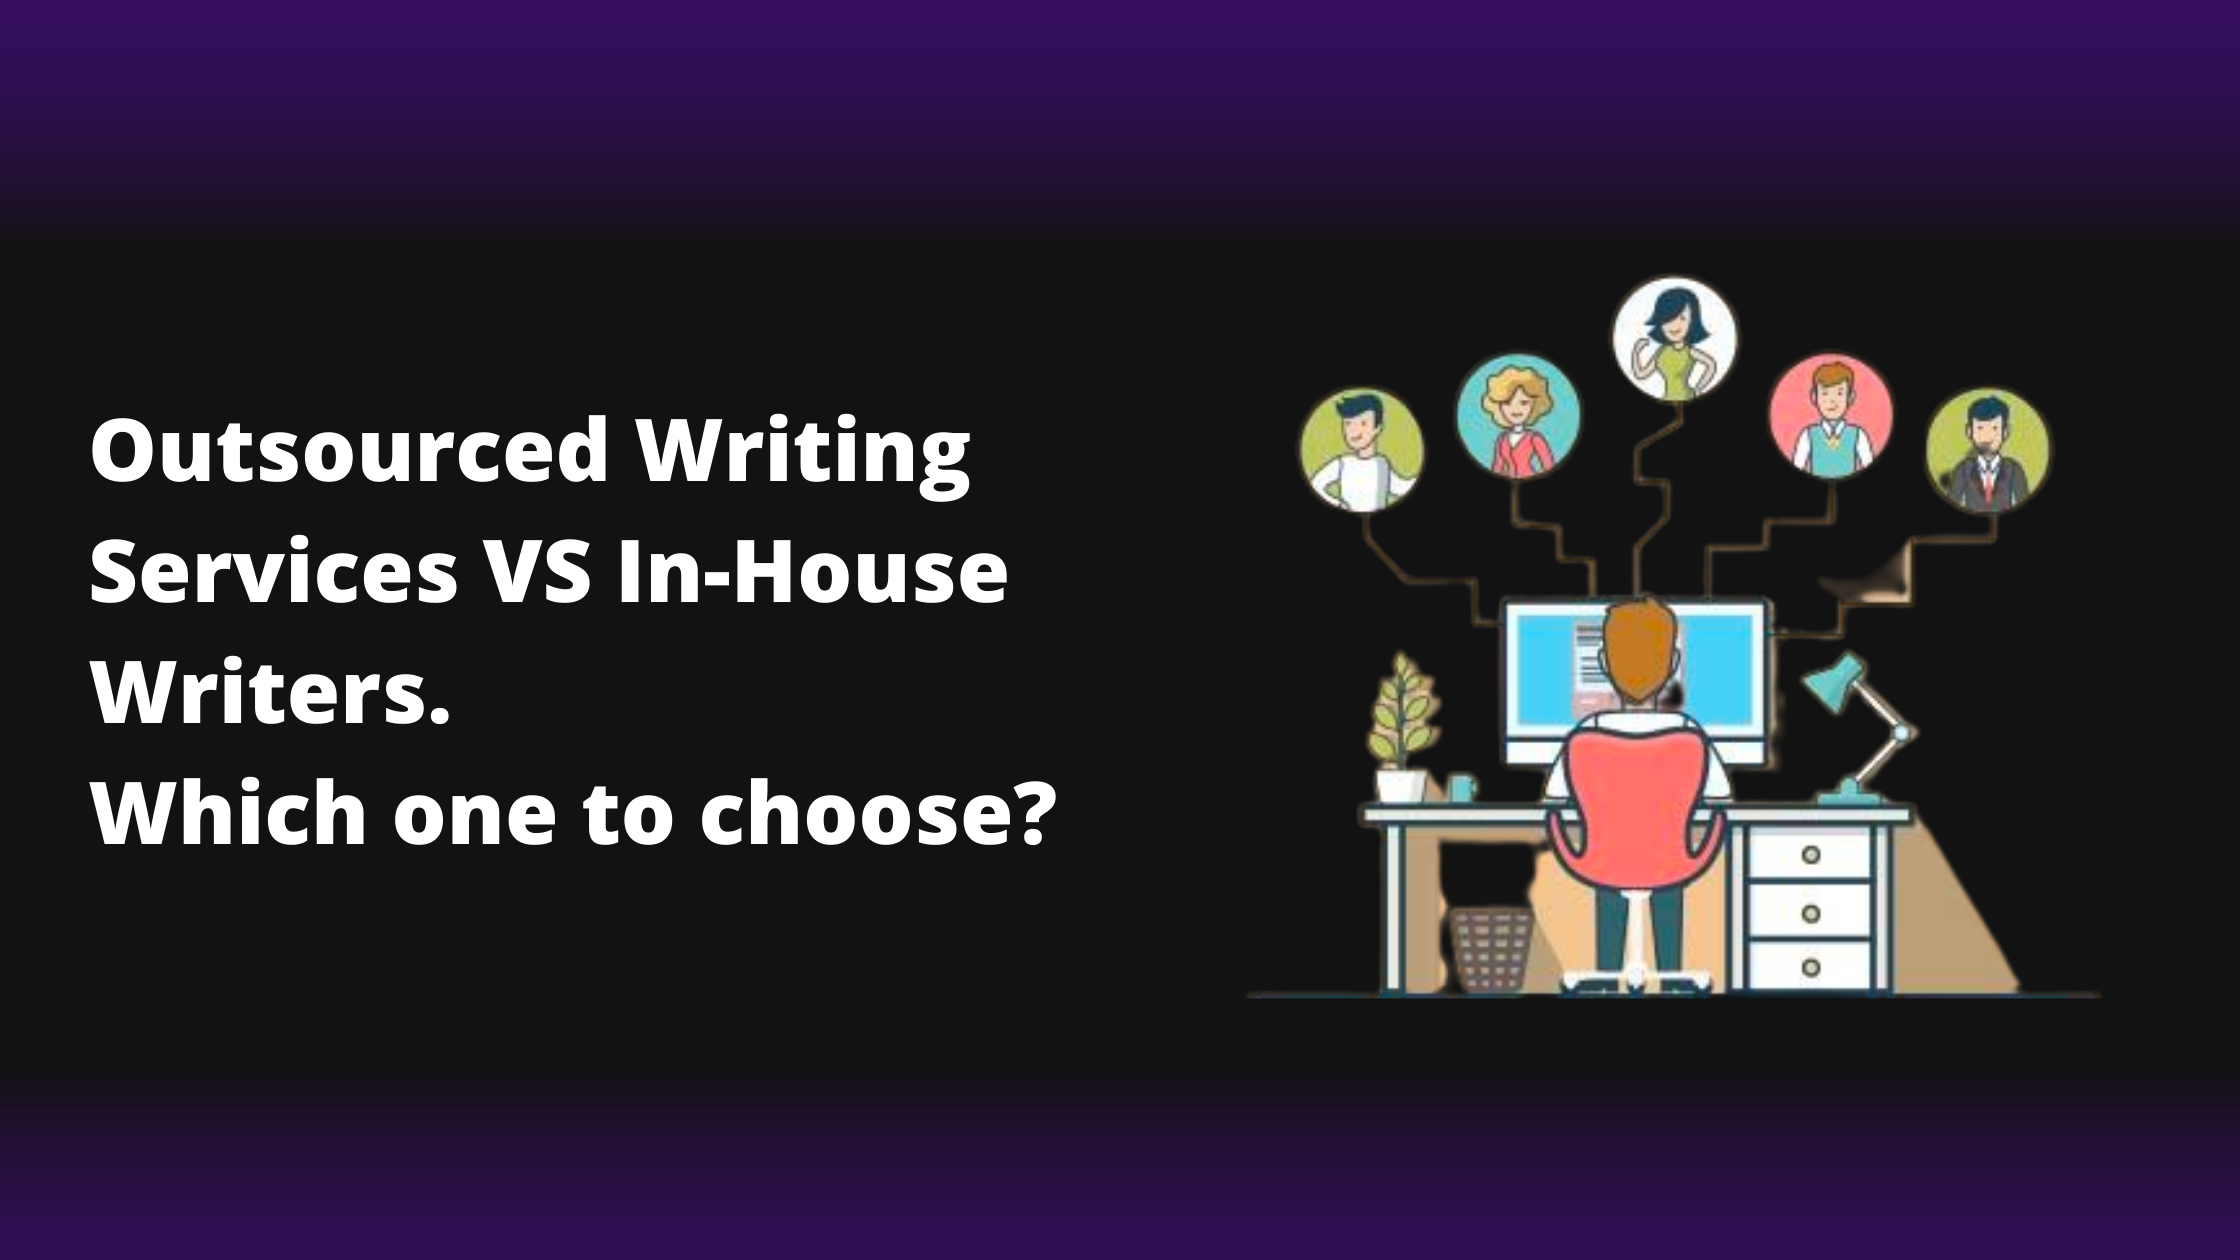 Outsourced Writing Services VS In-House Writerers